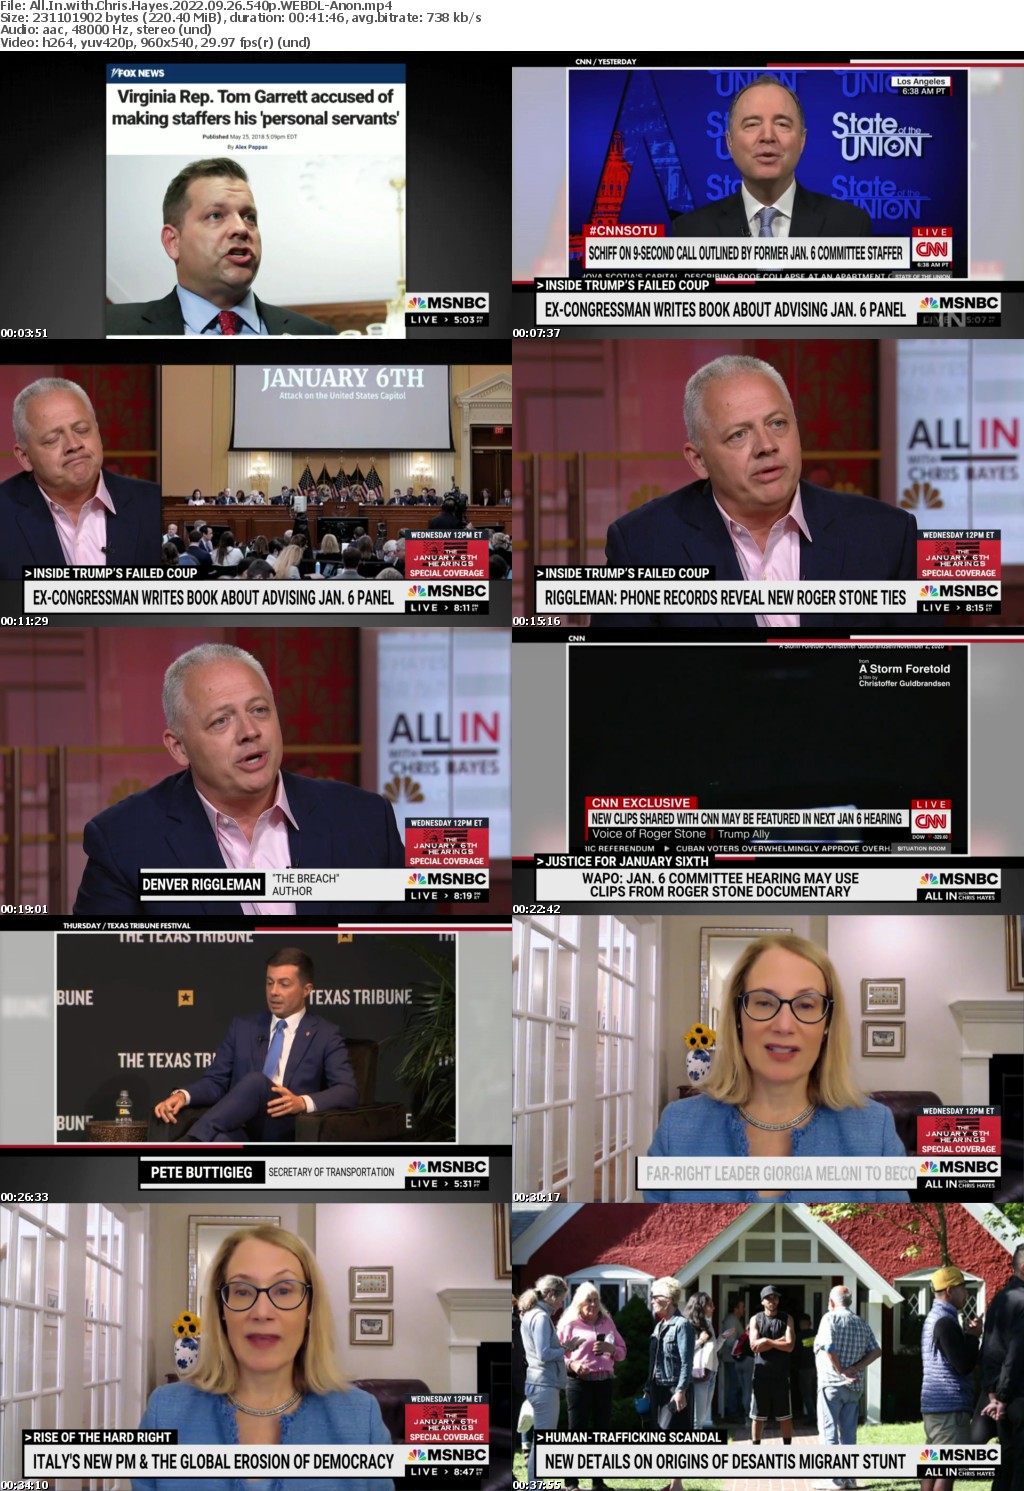 All In with Chris Hayes 2022 09 26 540p WEBDL-Anon